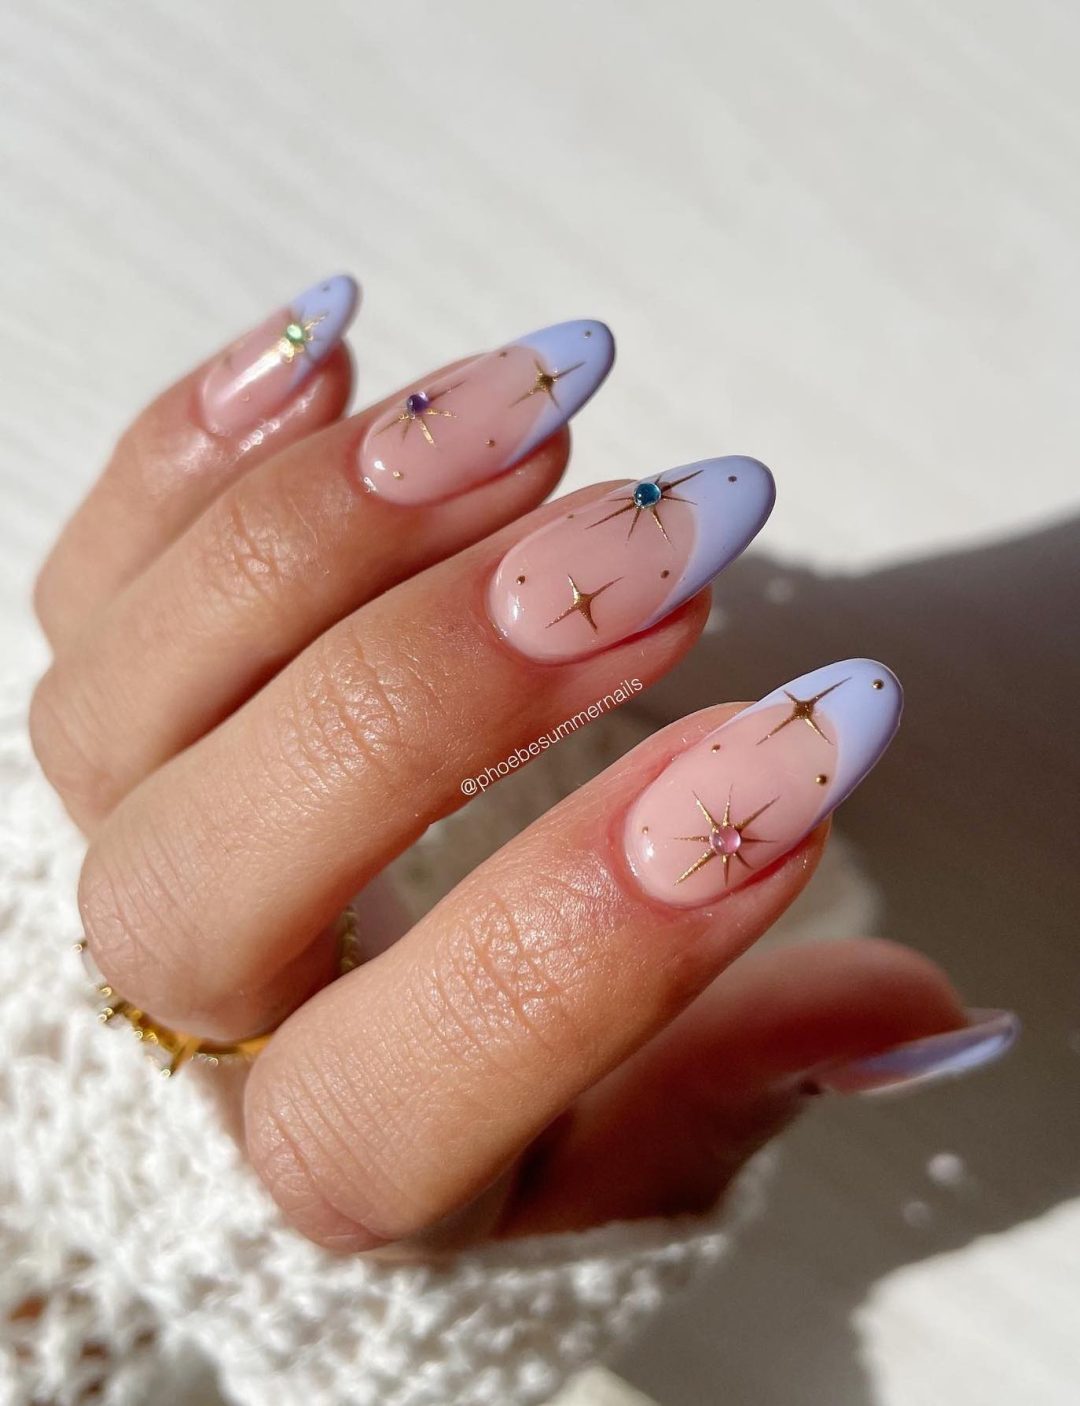 Lavender French tip nails with star details.